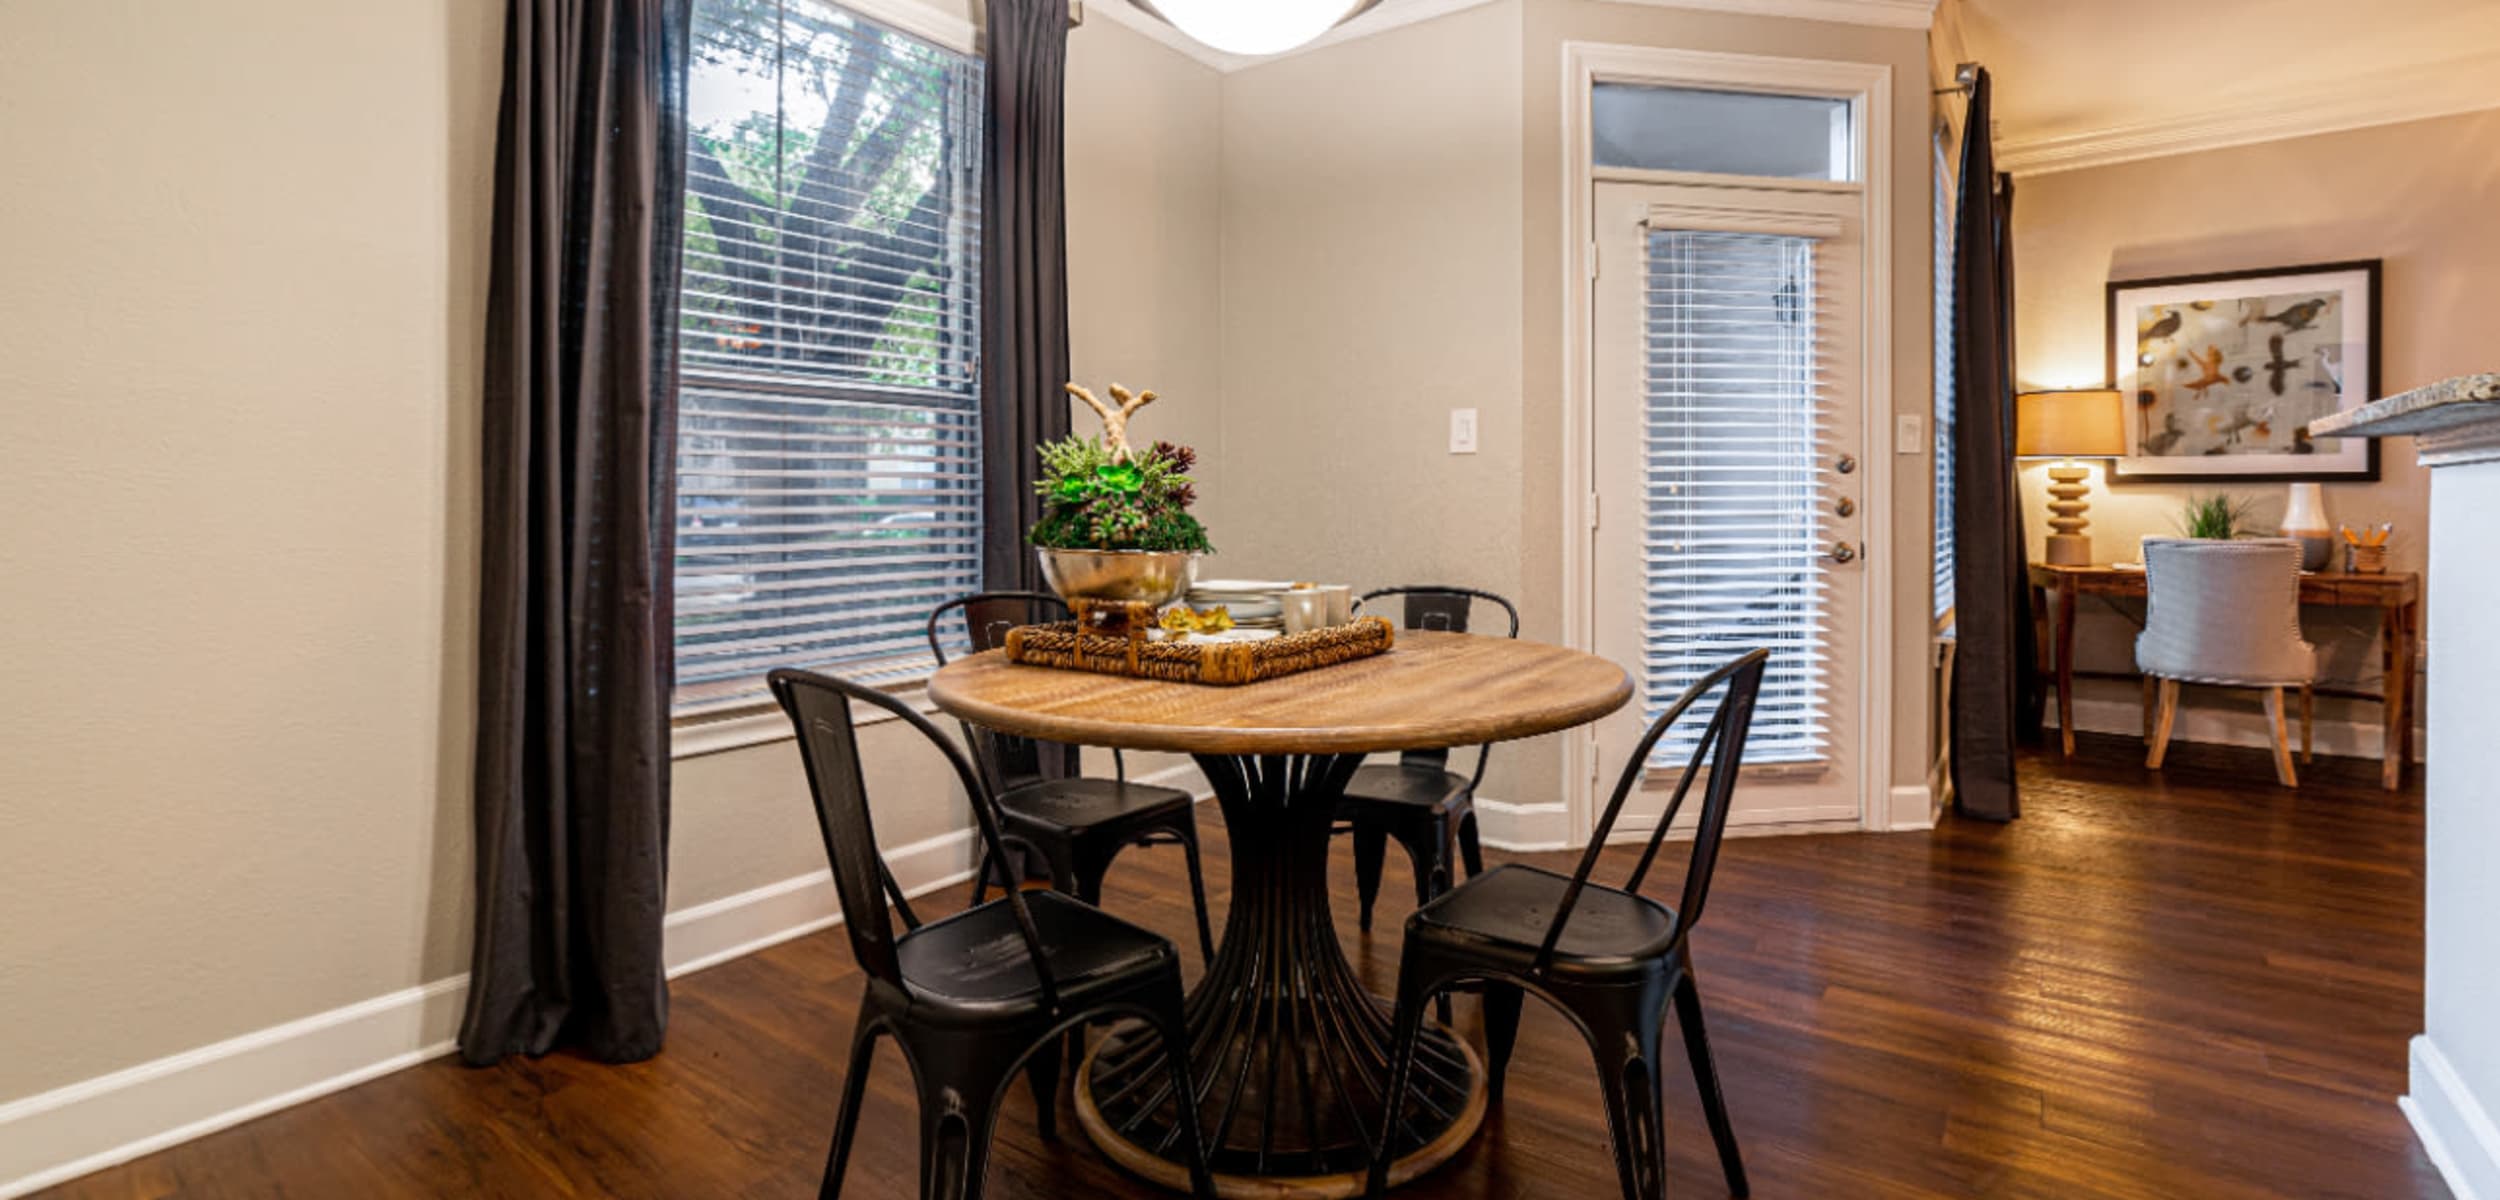 Dining table and chairs with large window and wood flooring at Marquis at Great Hills in Austin, Texas